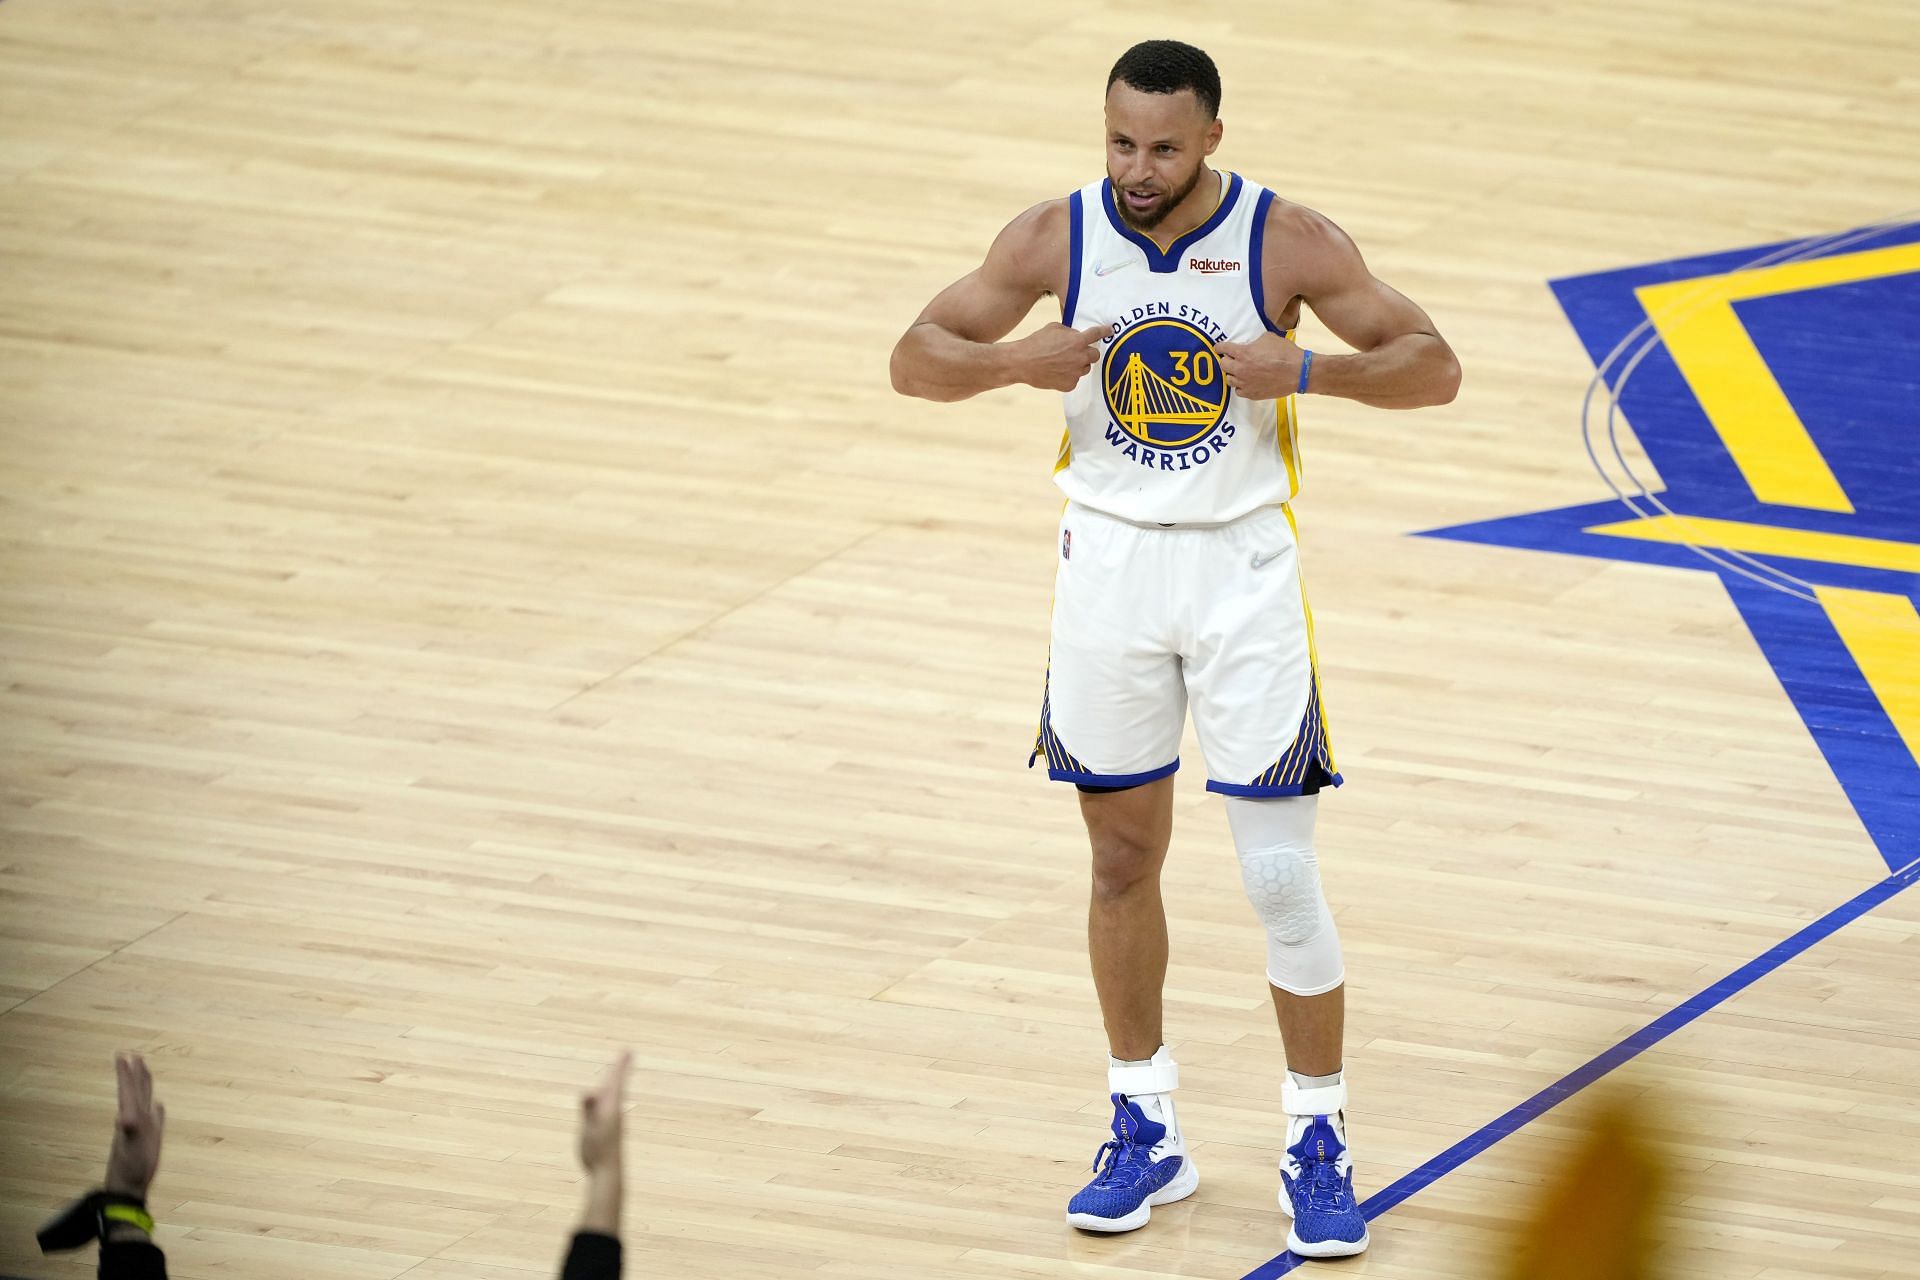 Steph Curry exploded for a team-high 32 points in the game.